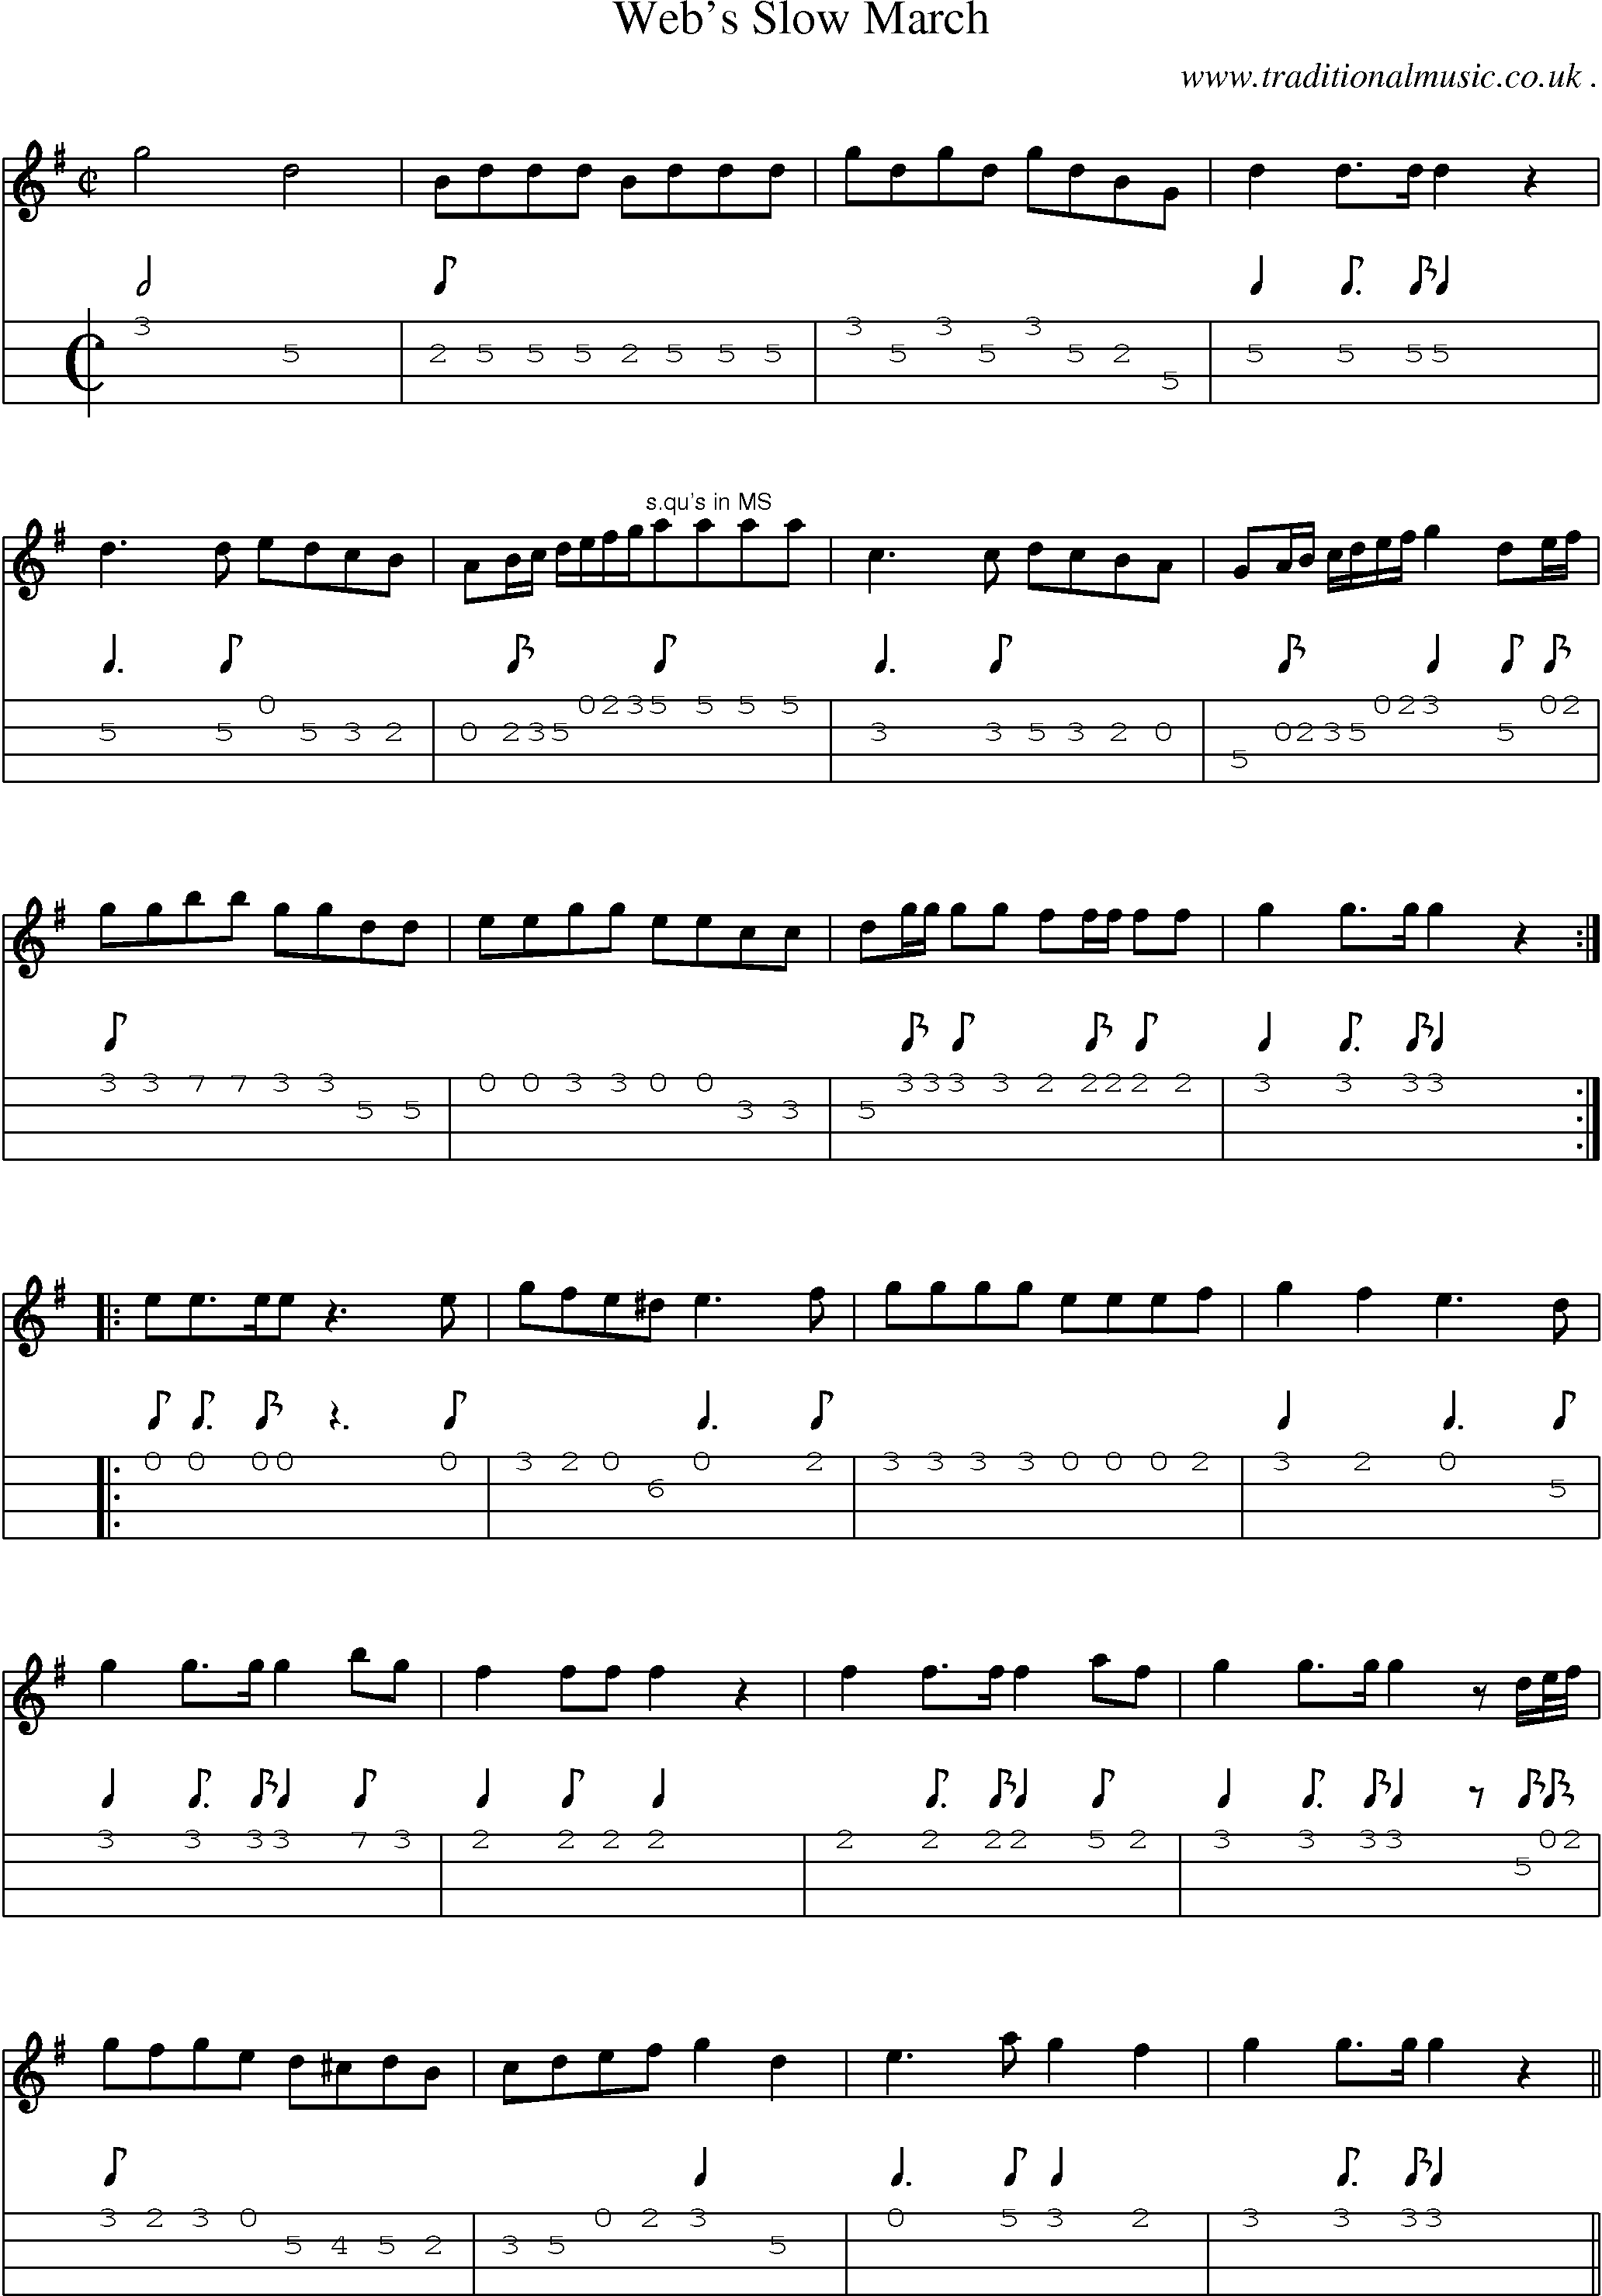 Sheet-Music and Mandolin Tabs for Webs Slow March